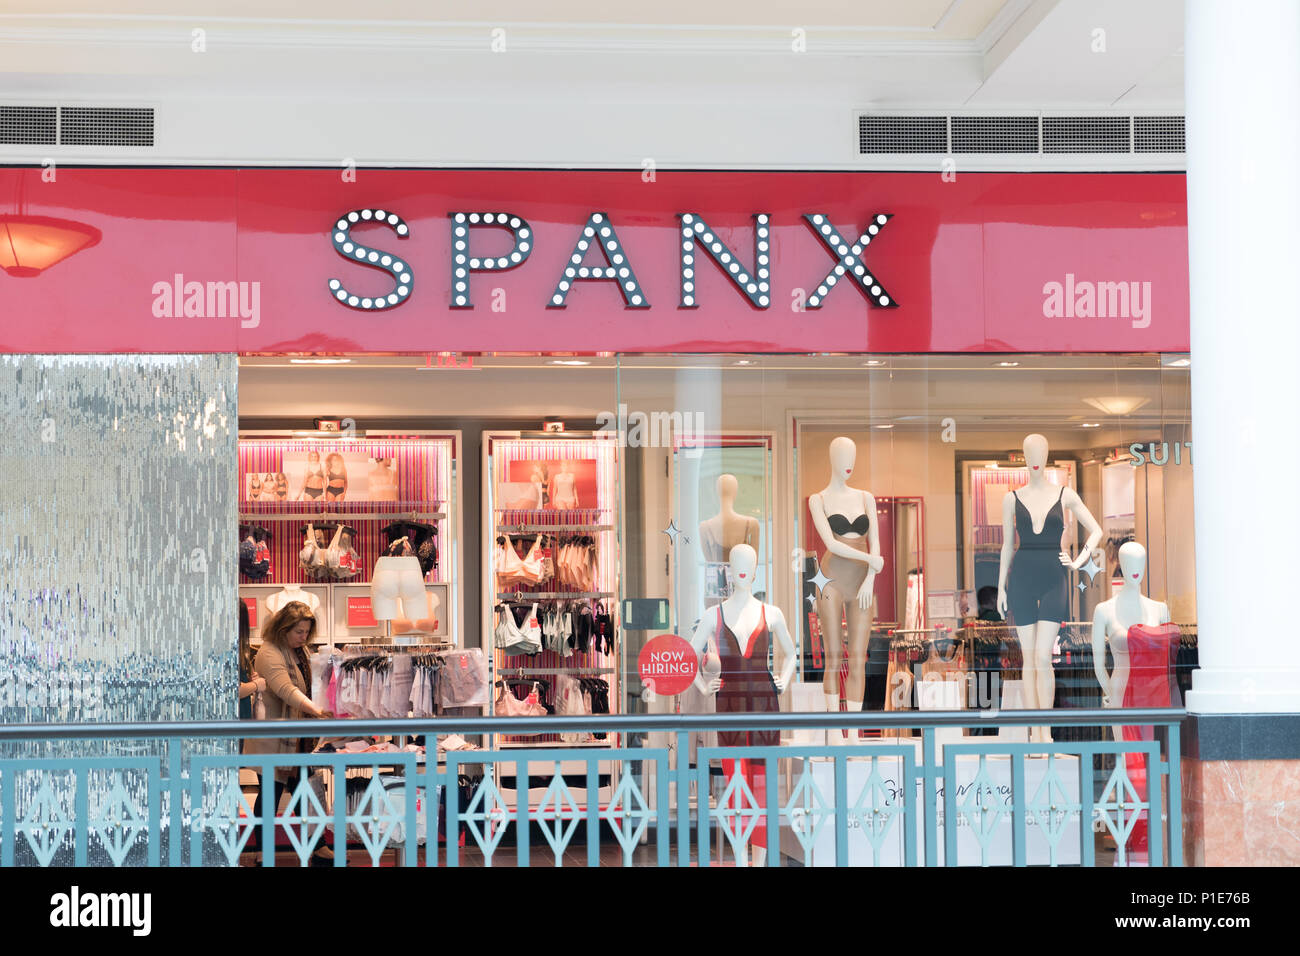 Philadelphia, Pennsylvania, May 19 2018: Spanx store sign entrance with  vibrant red, pink color display in Philadelphia Stock Photo - Alamy